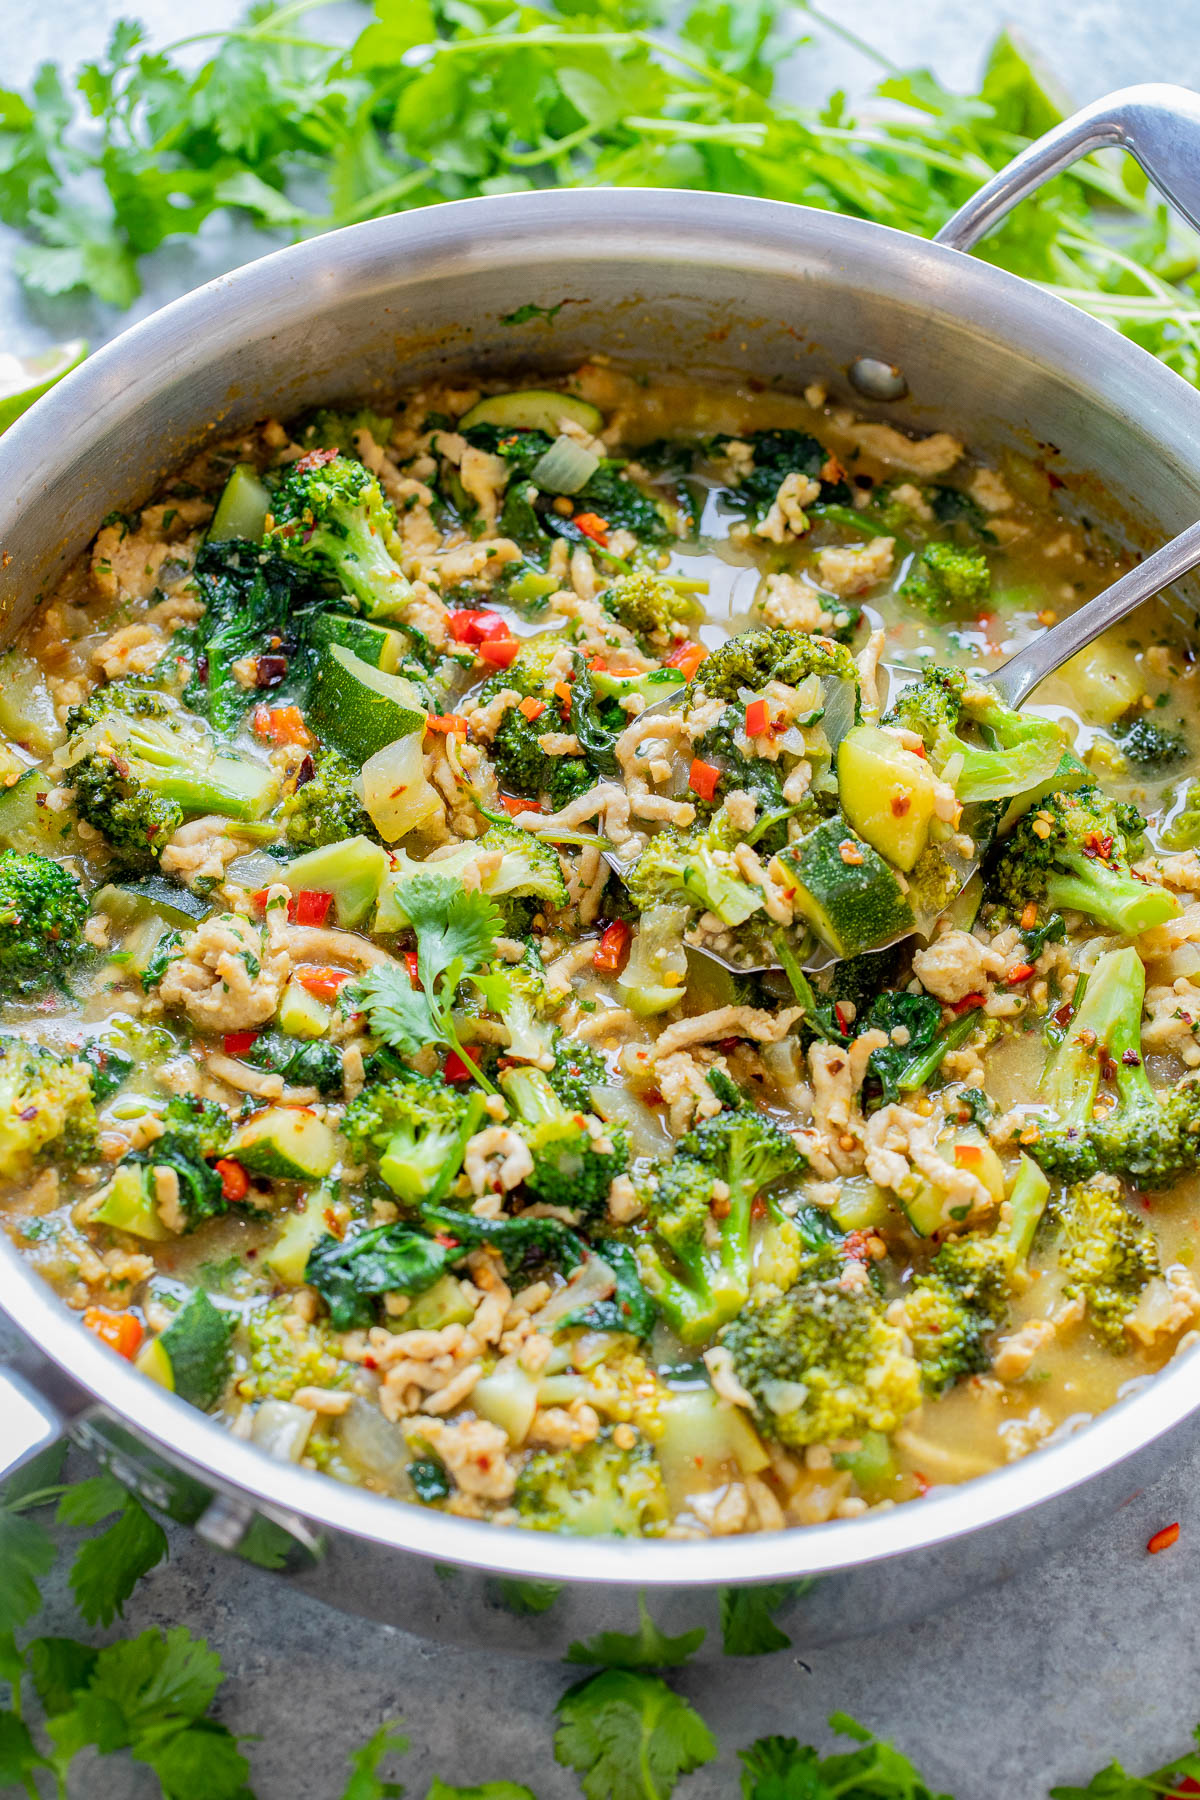 A colorful green curry with broccoli, peppers, and zucchini in a sauce, garnished with fresh cilantro.